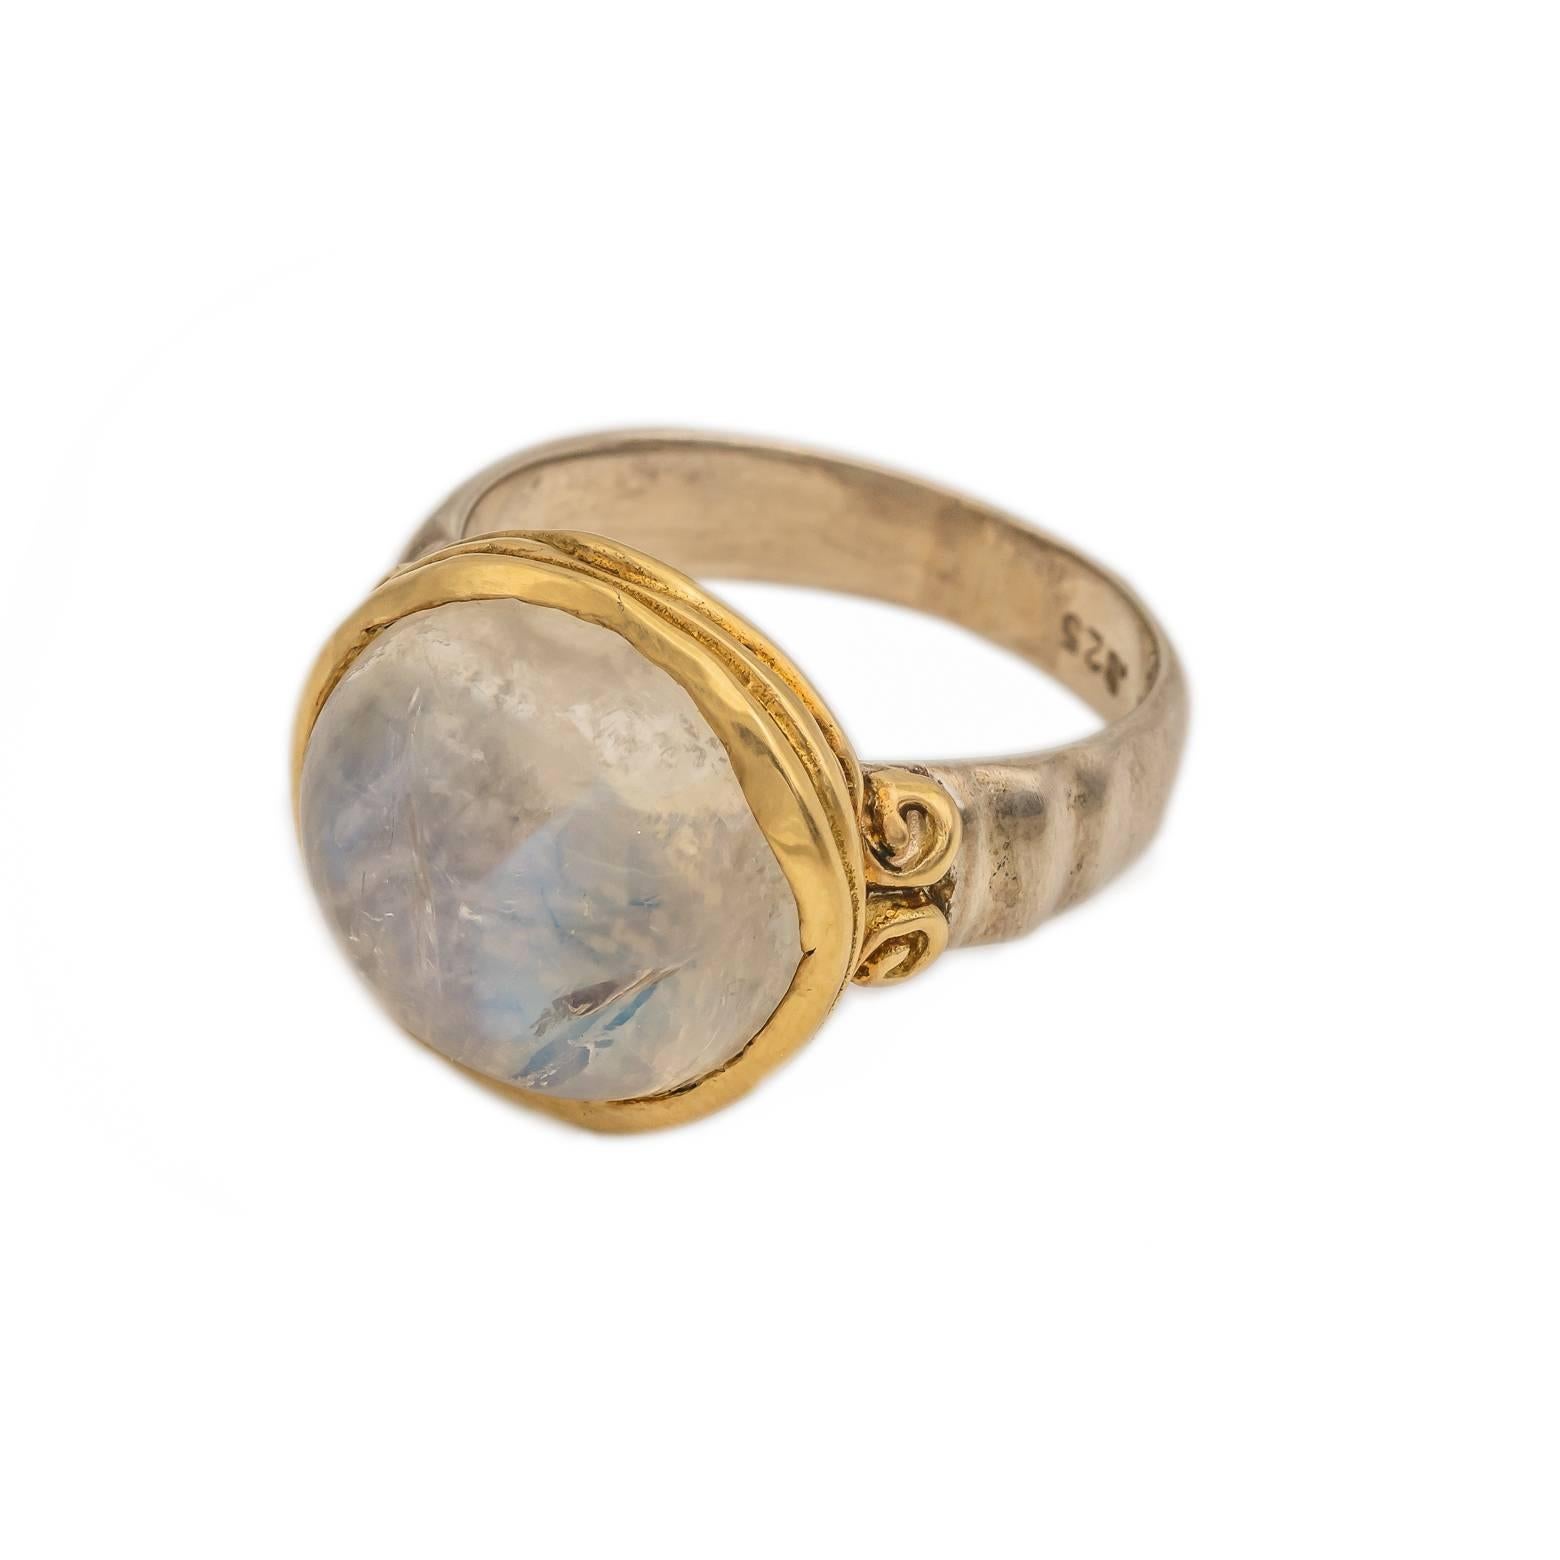 Classical Roman Large Oval Moonstone Ring in 18 Karat Yellow Gold and Sterling Silver